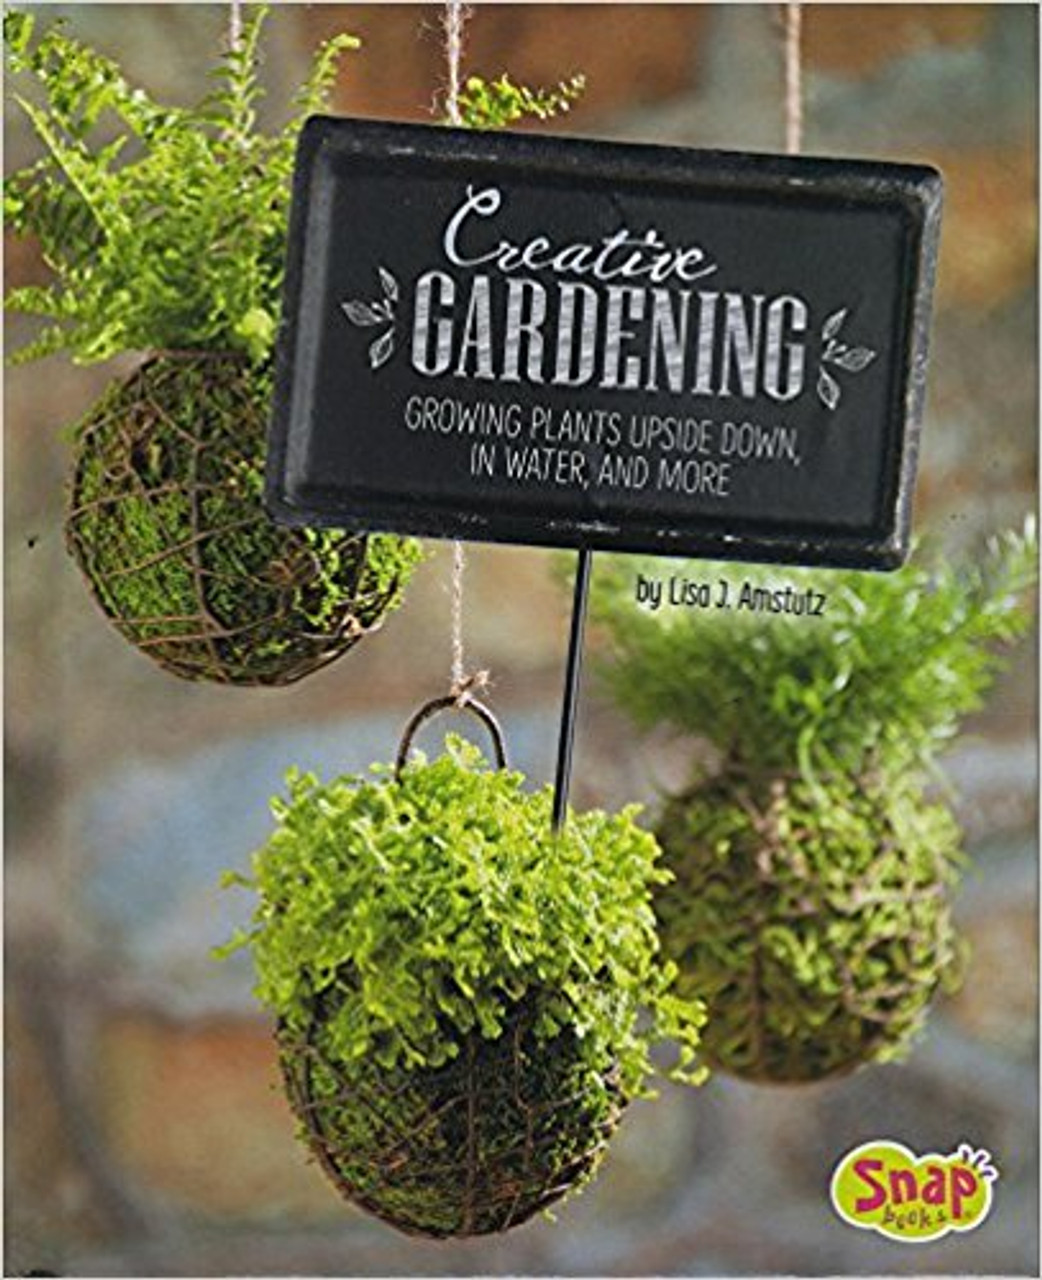 Creative gardening: Growing Plants Upside Down, in Water, and More by Lisa J Amstutz